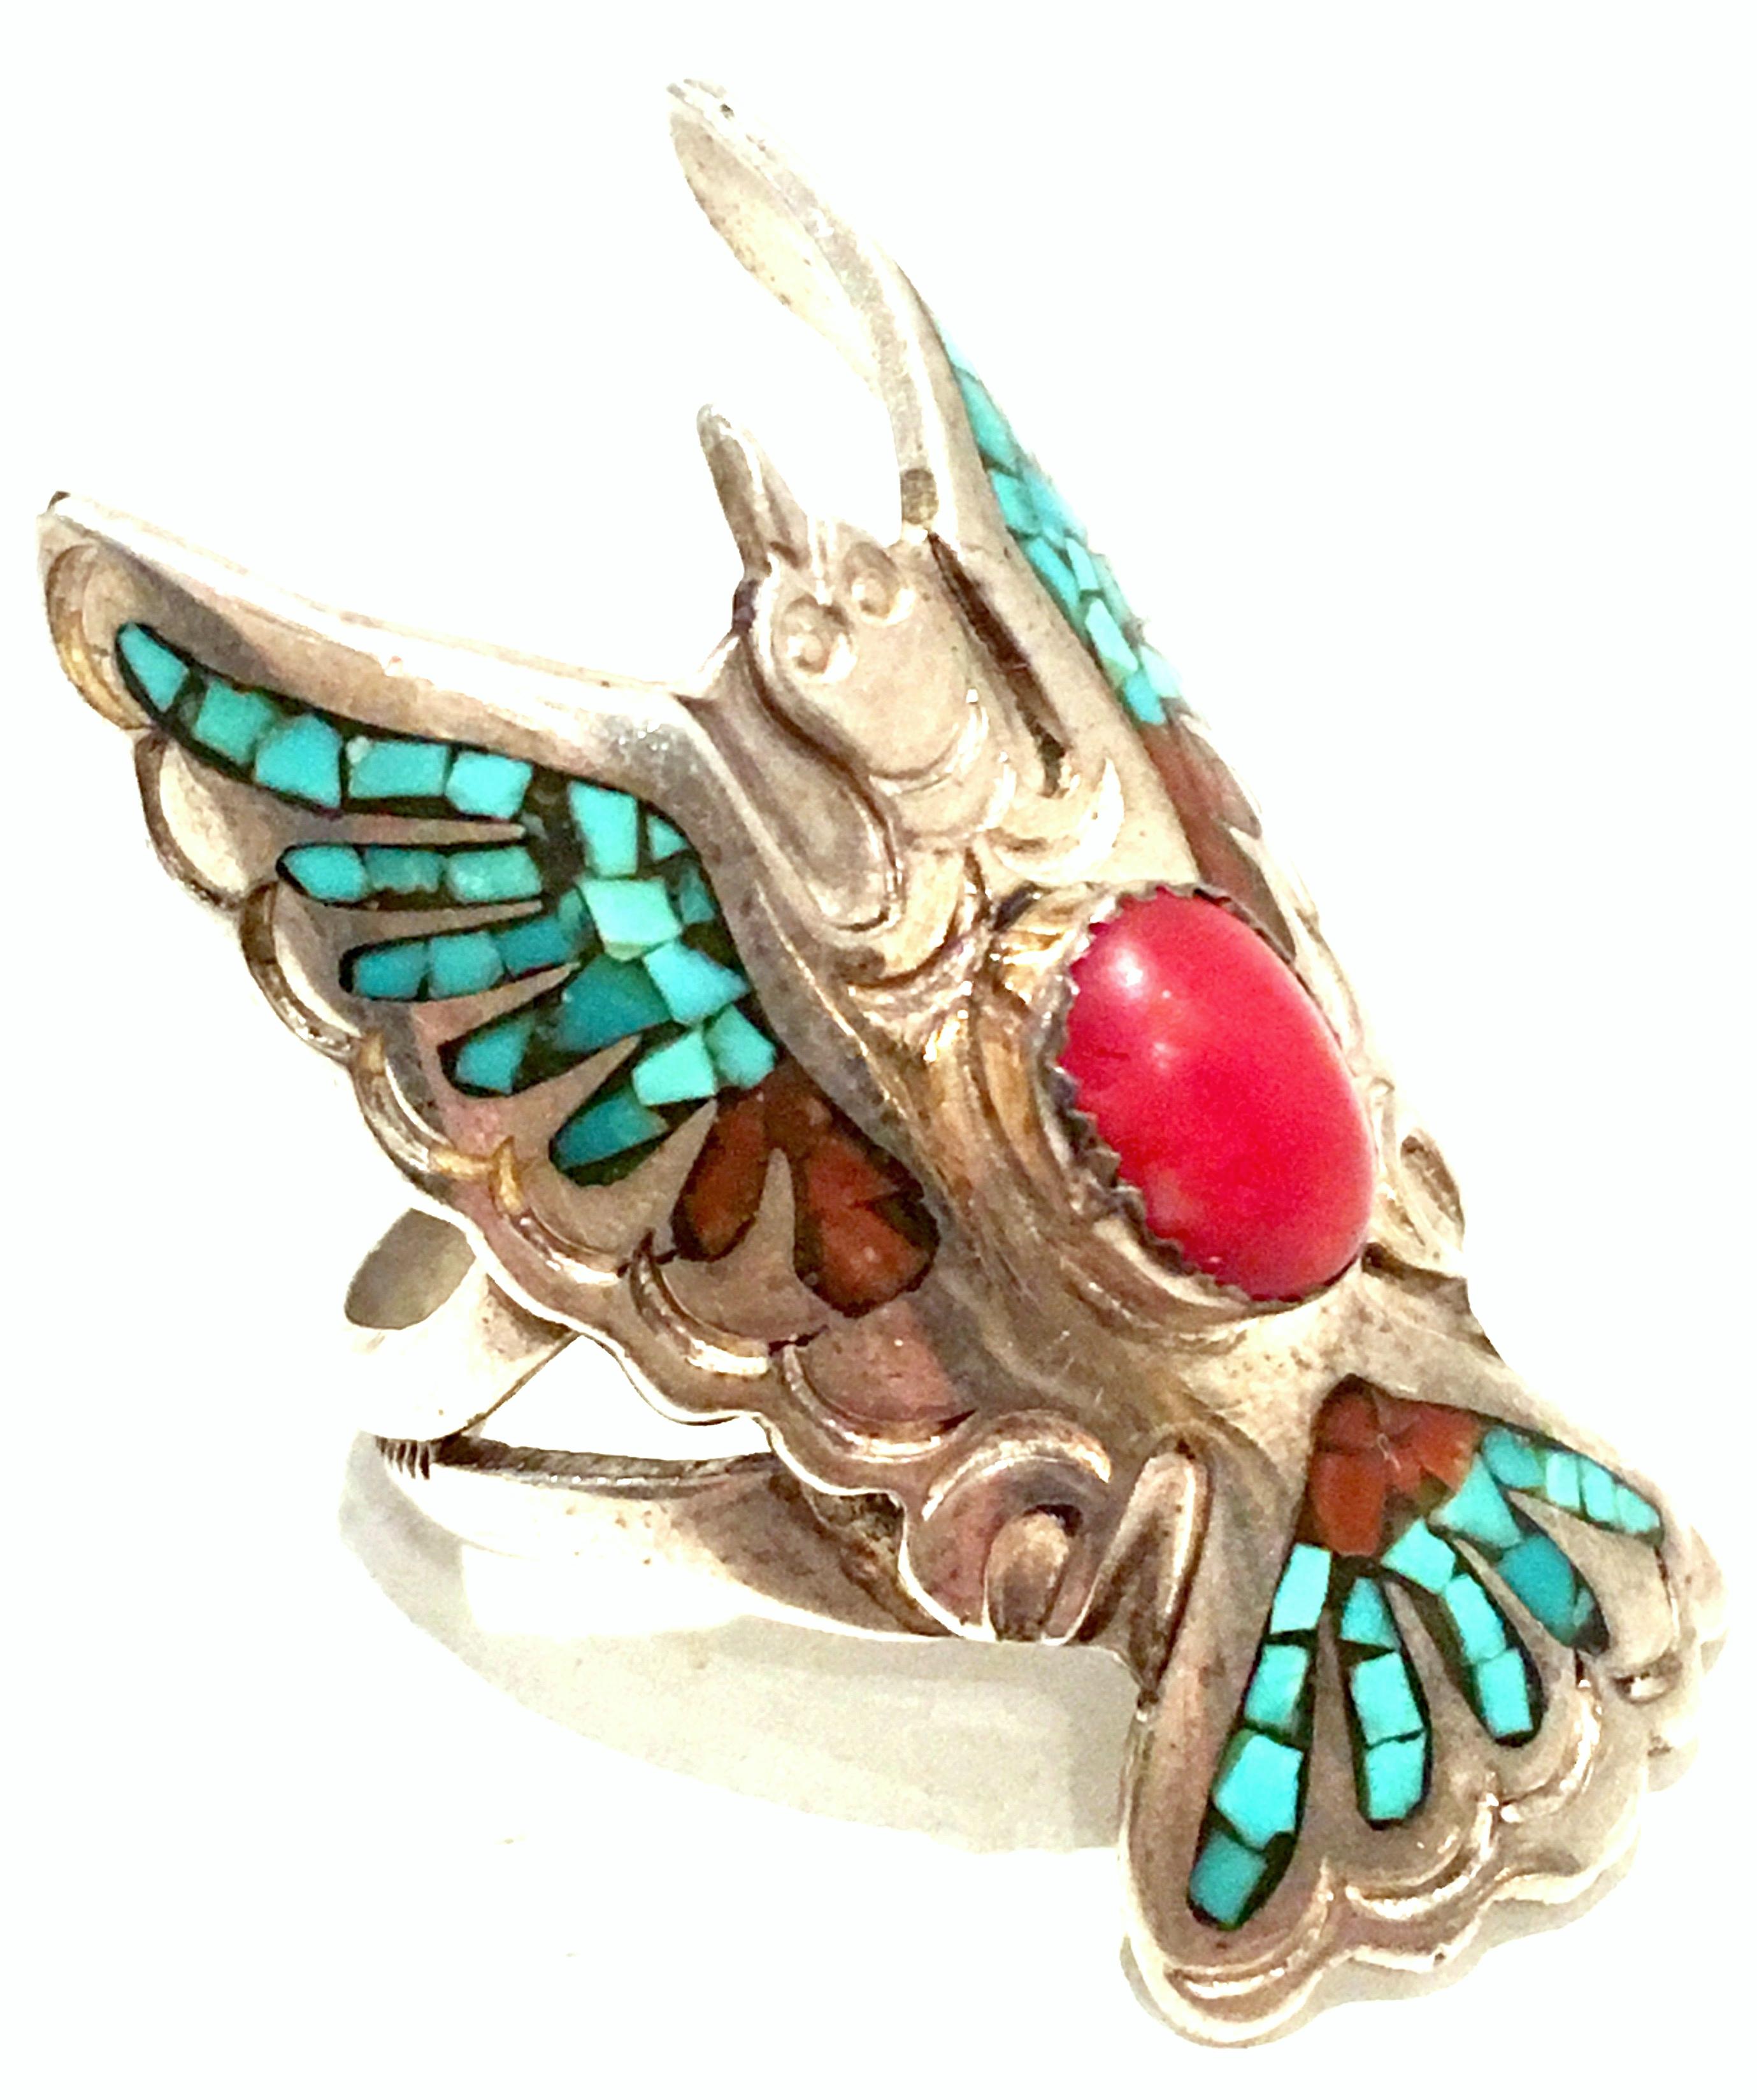 20th Century Navajo Sterling Silver Turquoise & Coral Ring By, Loren Begay. This classic and timeless piece features 925 sterling silver with authentic turquoise and coral inlay stones with a central cabochon coral stone and a wrap around Eagle